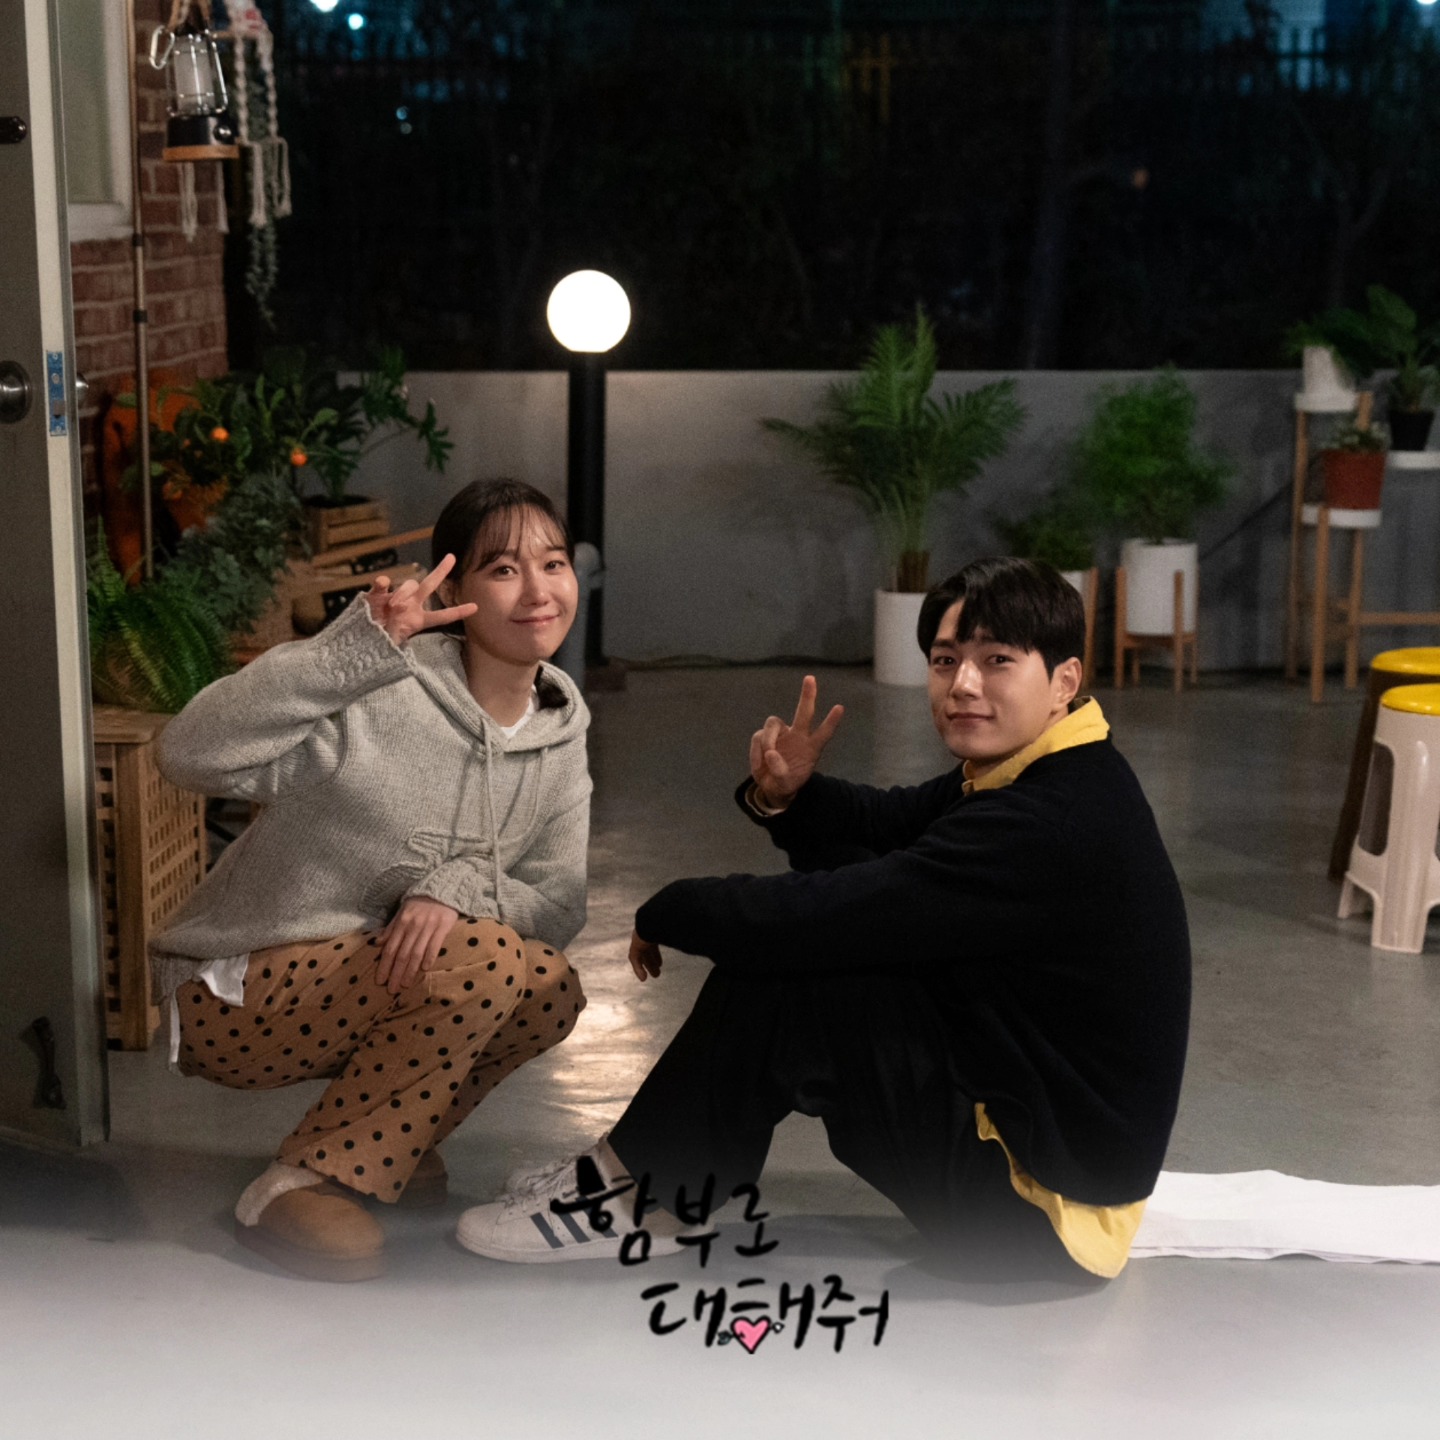 Kim Myung Soo And Lee Yoo Young Show Professionalism And Great Chemistry Behind The Scenes Of 